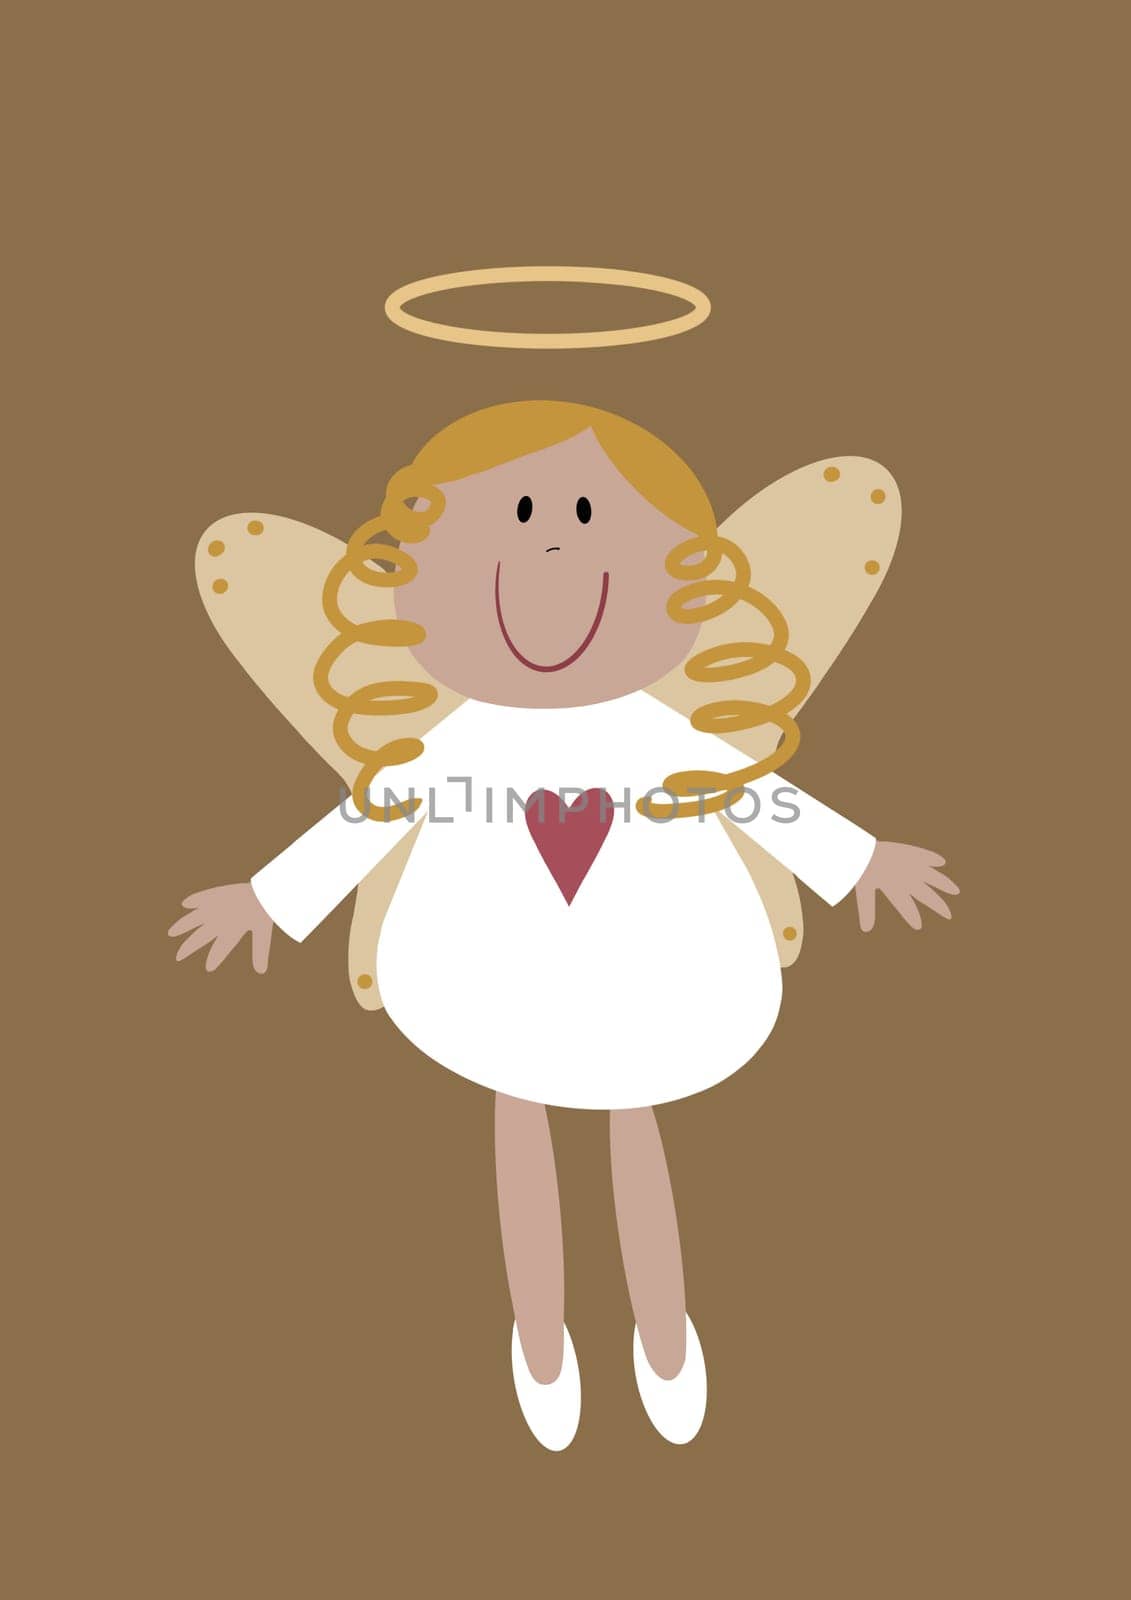 Cute Christmas angel illustration in a quirky cartoon style. Cartoon rustic folk art angel design. This simple nativity angel has a golden halo and heart motif on her dress.. Perfect character as a Christmas tree topper.